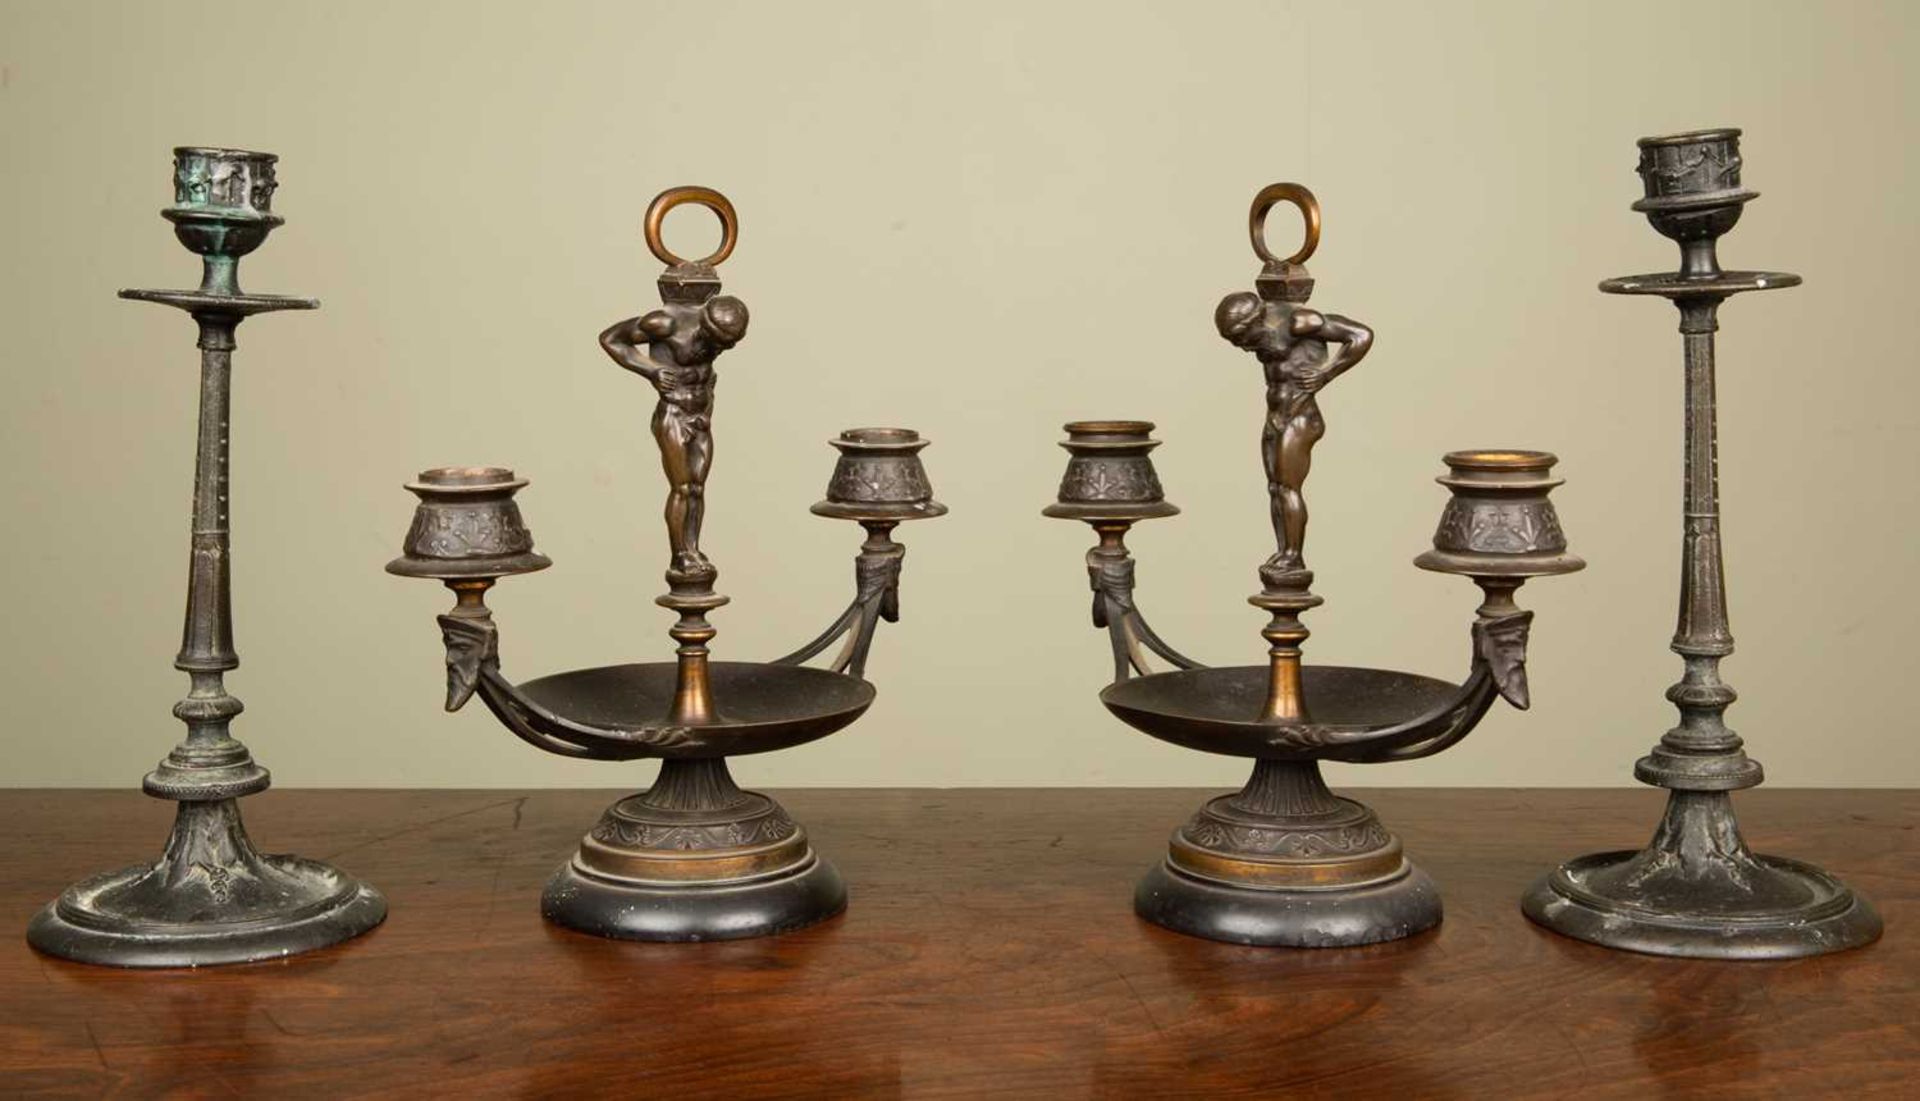 A pair of 19th century continental small candelabra in the classical form with central Atlas figures